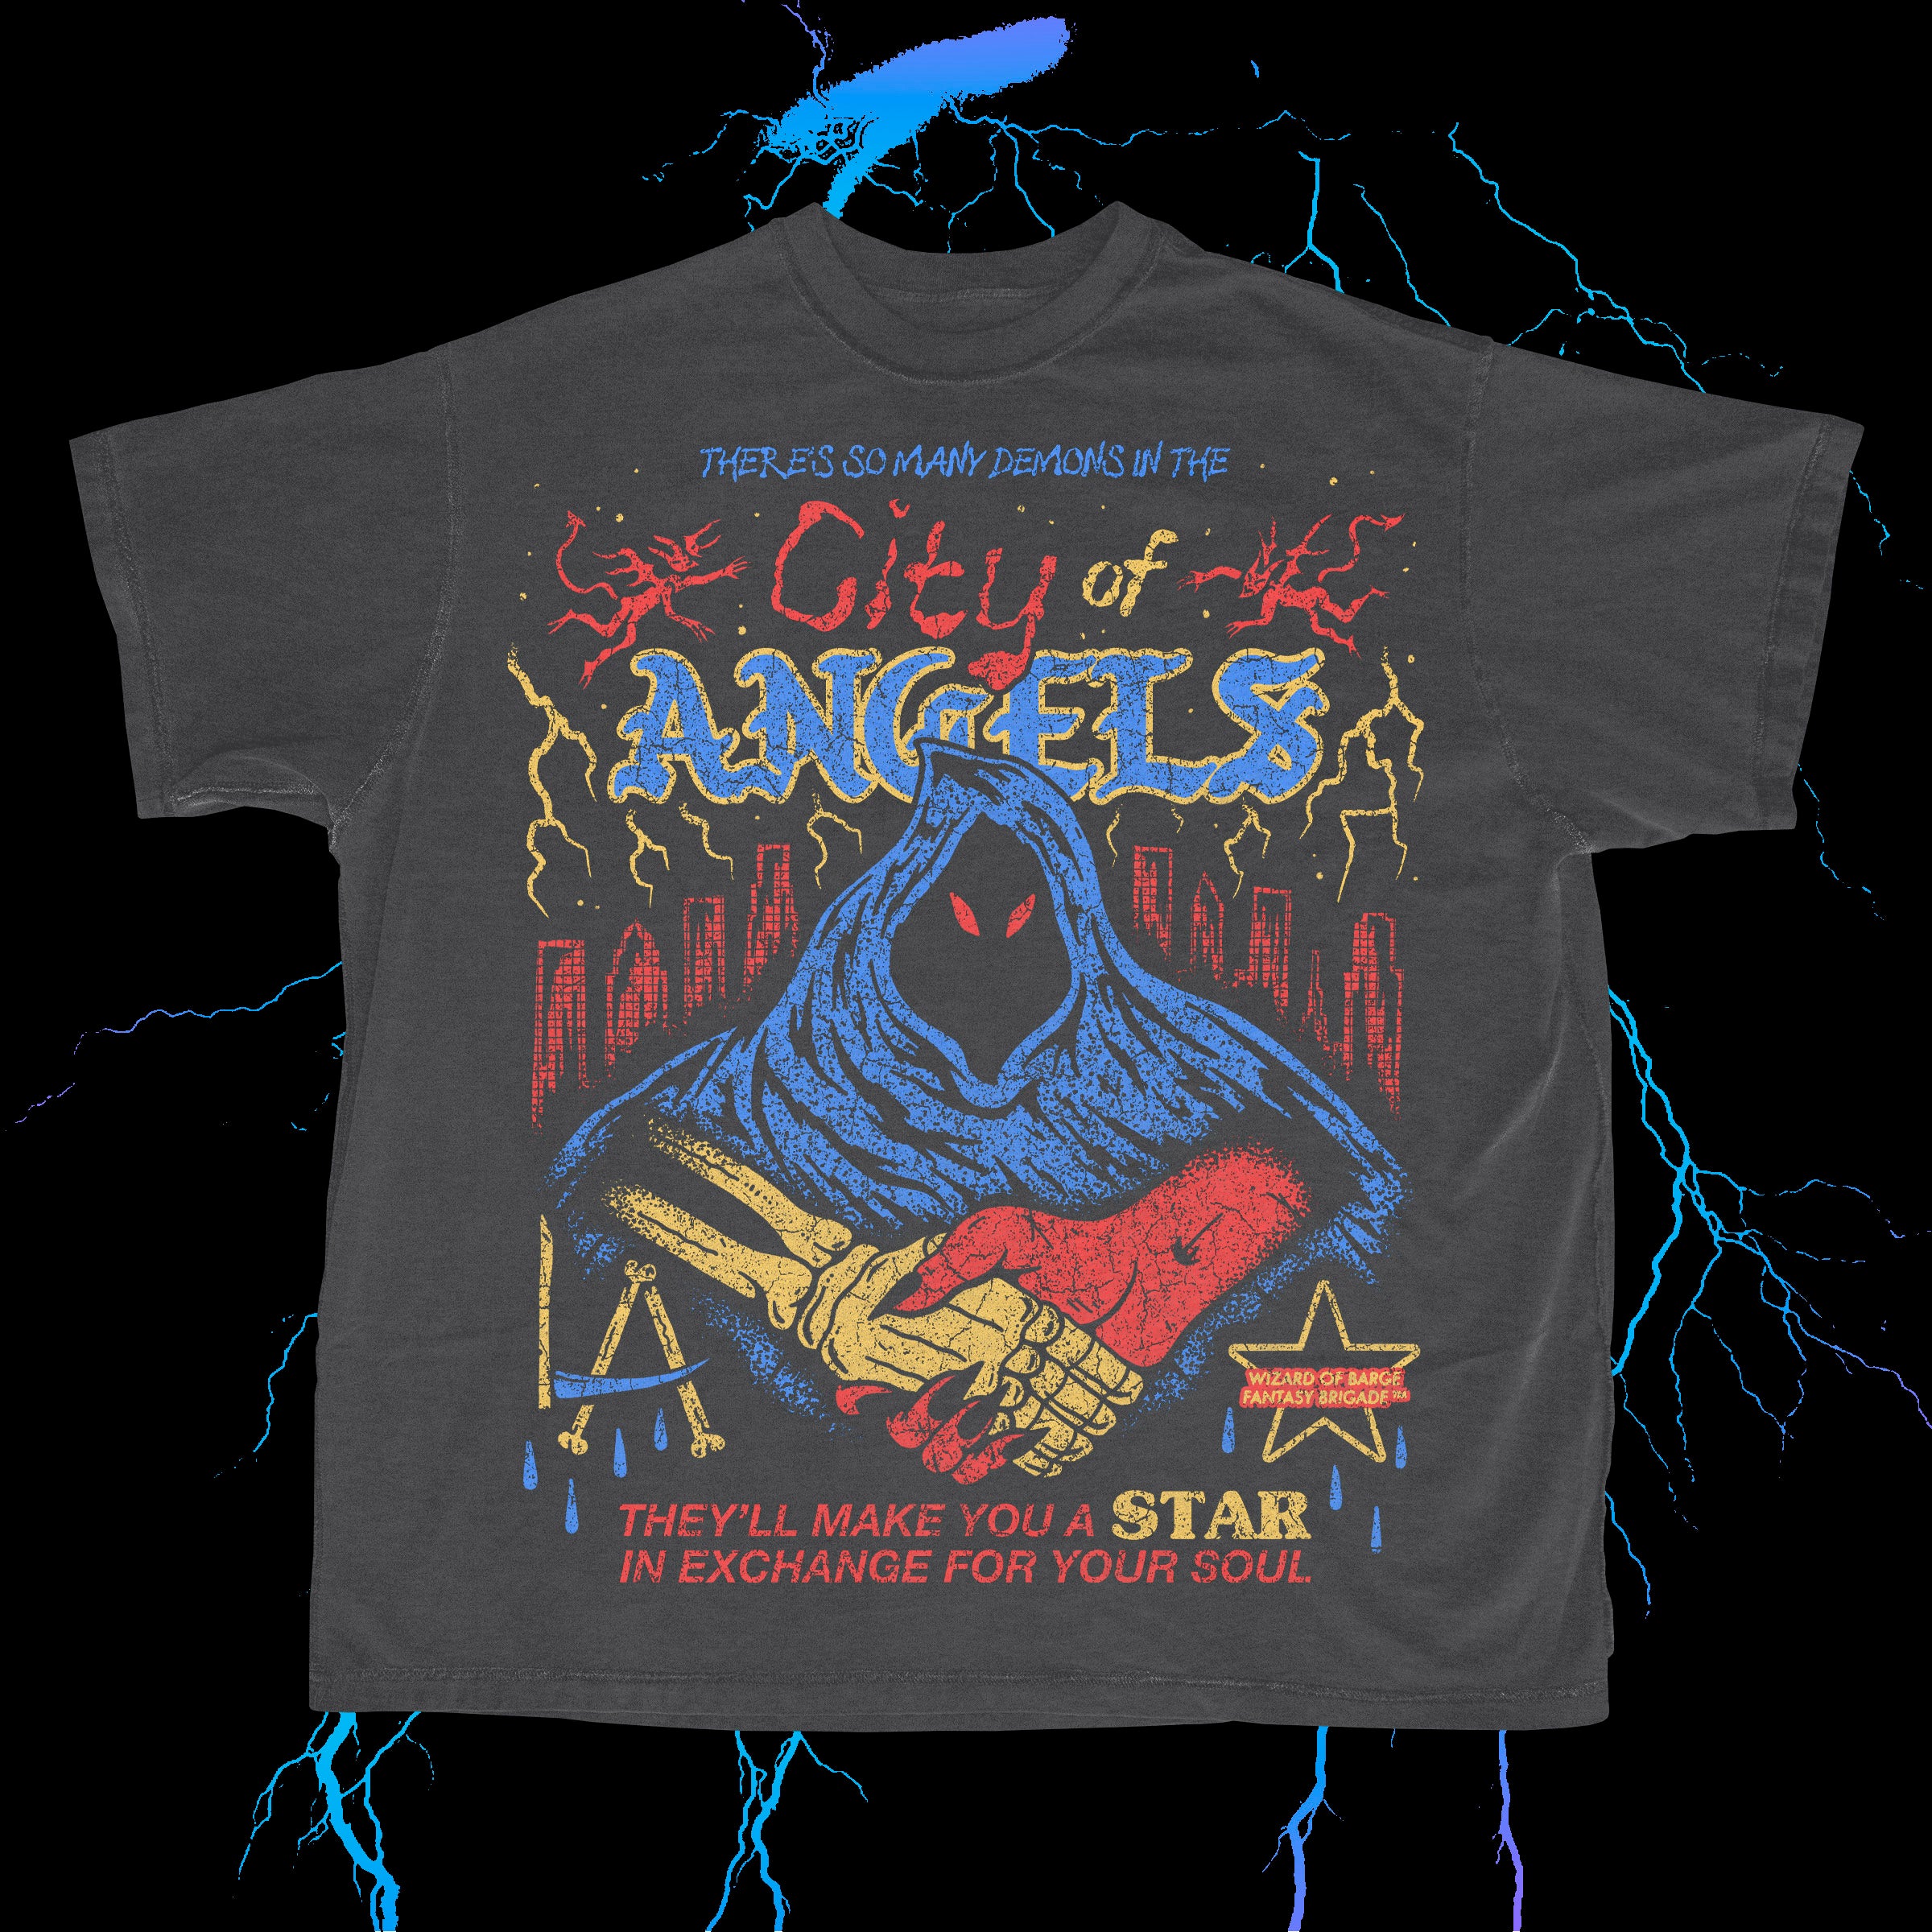  Vintage Los Angeles City of Angels California Red Text Long  Sleeve T-Shirt : Clothing, Shoes & Jewelry